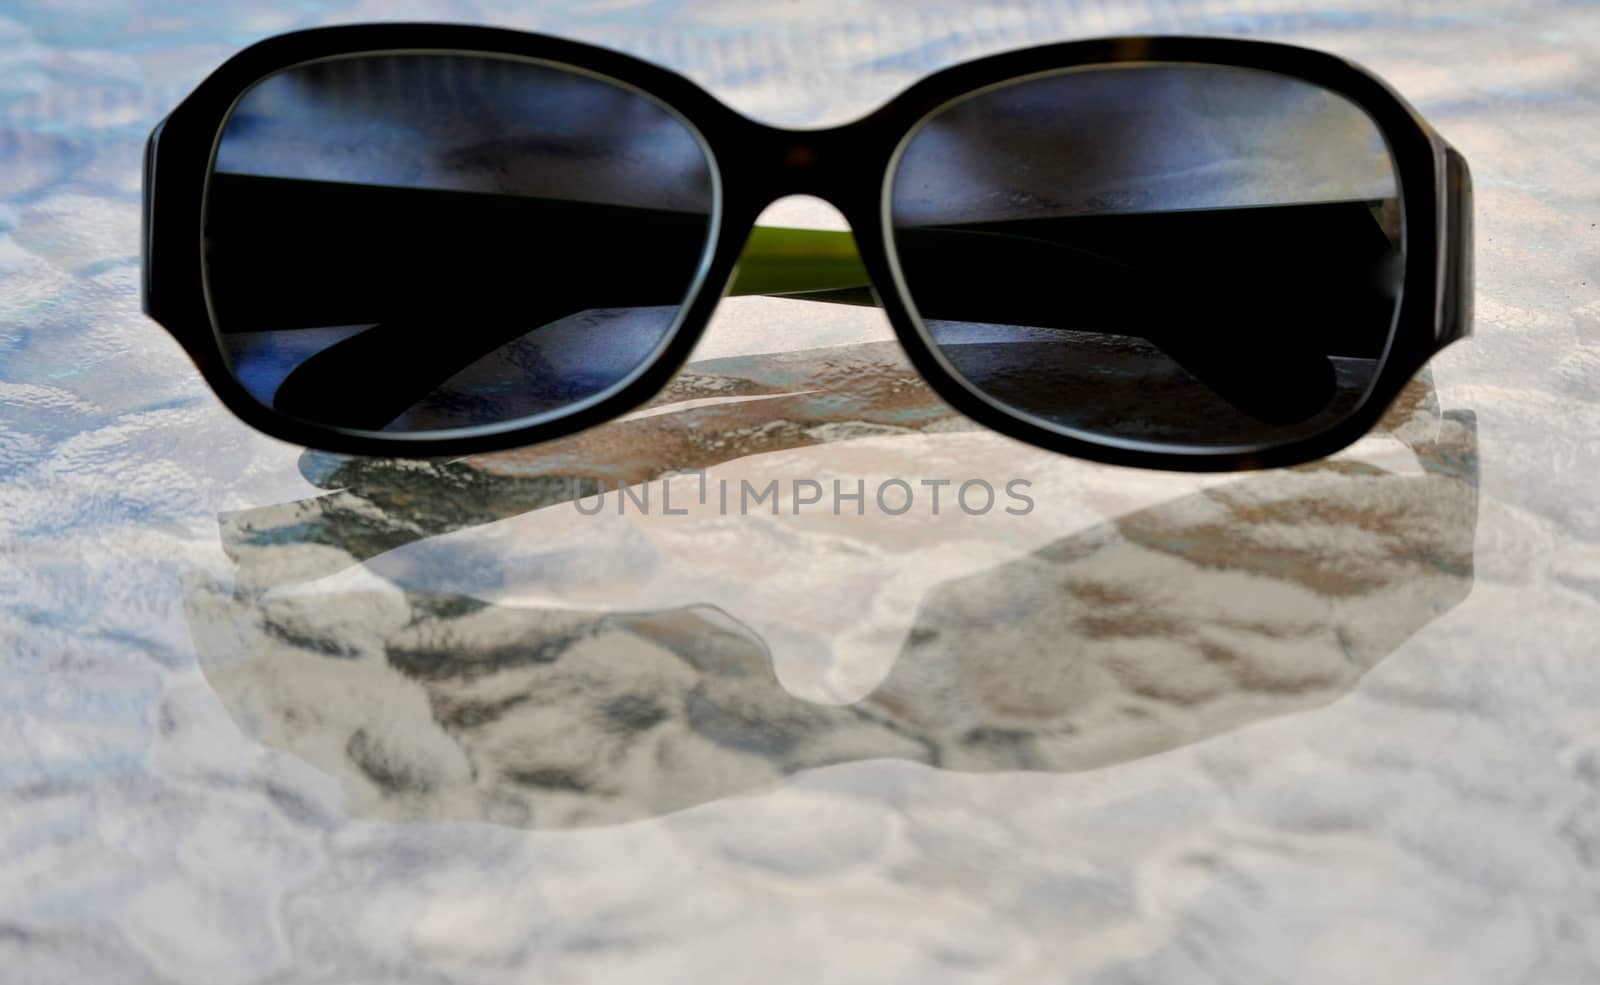 Sunglasses on vacation at the beach.